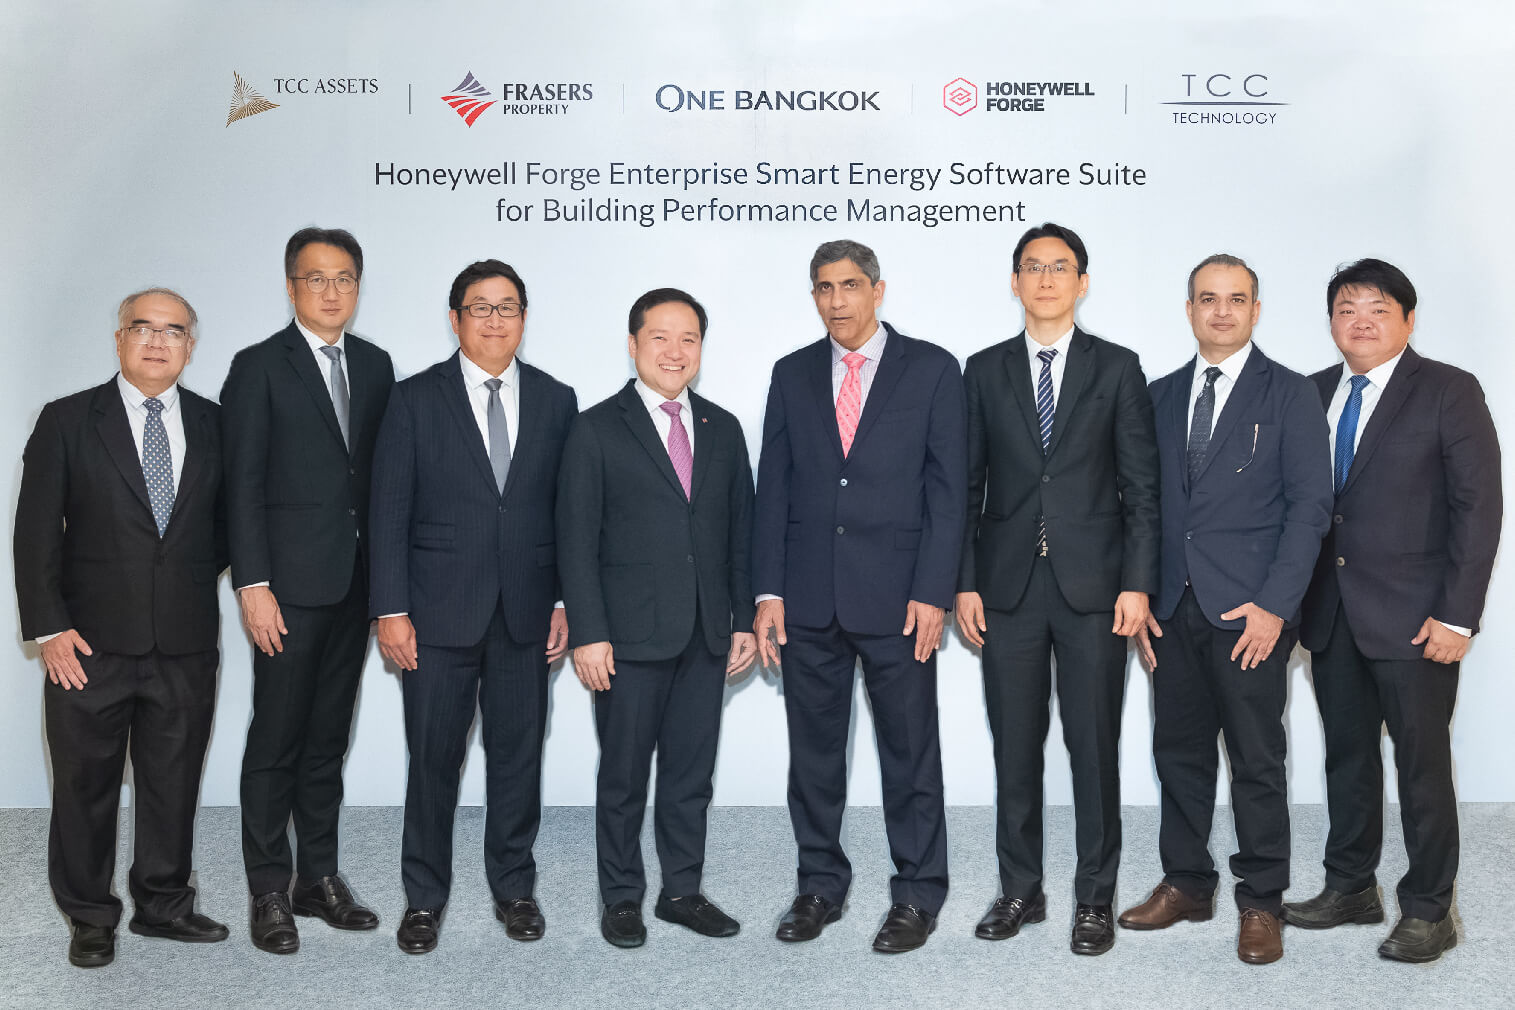 One Bangkok Implements Honeywell Technology To Elevate Digital Building ...